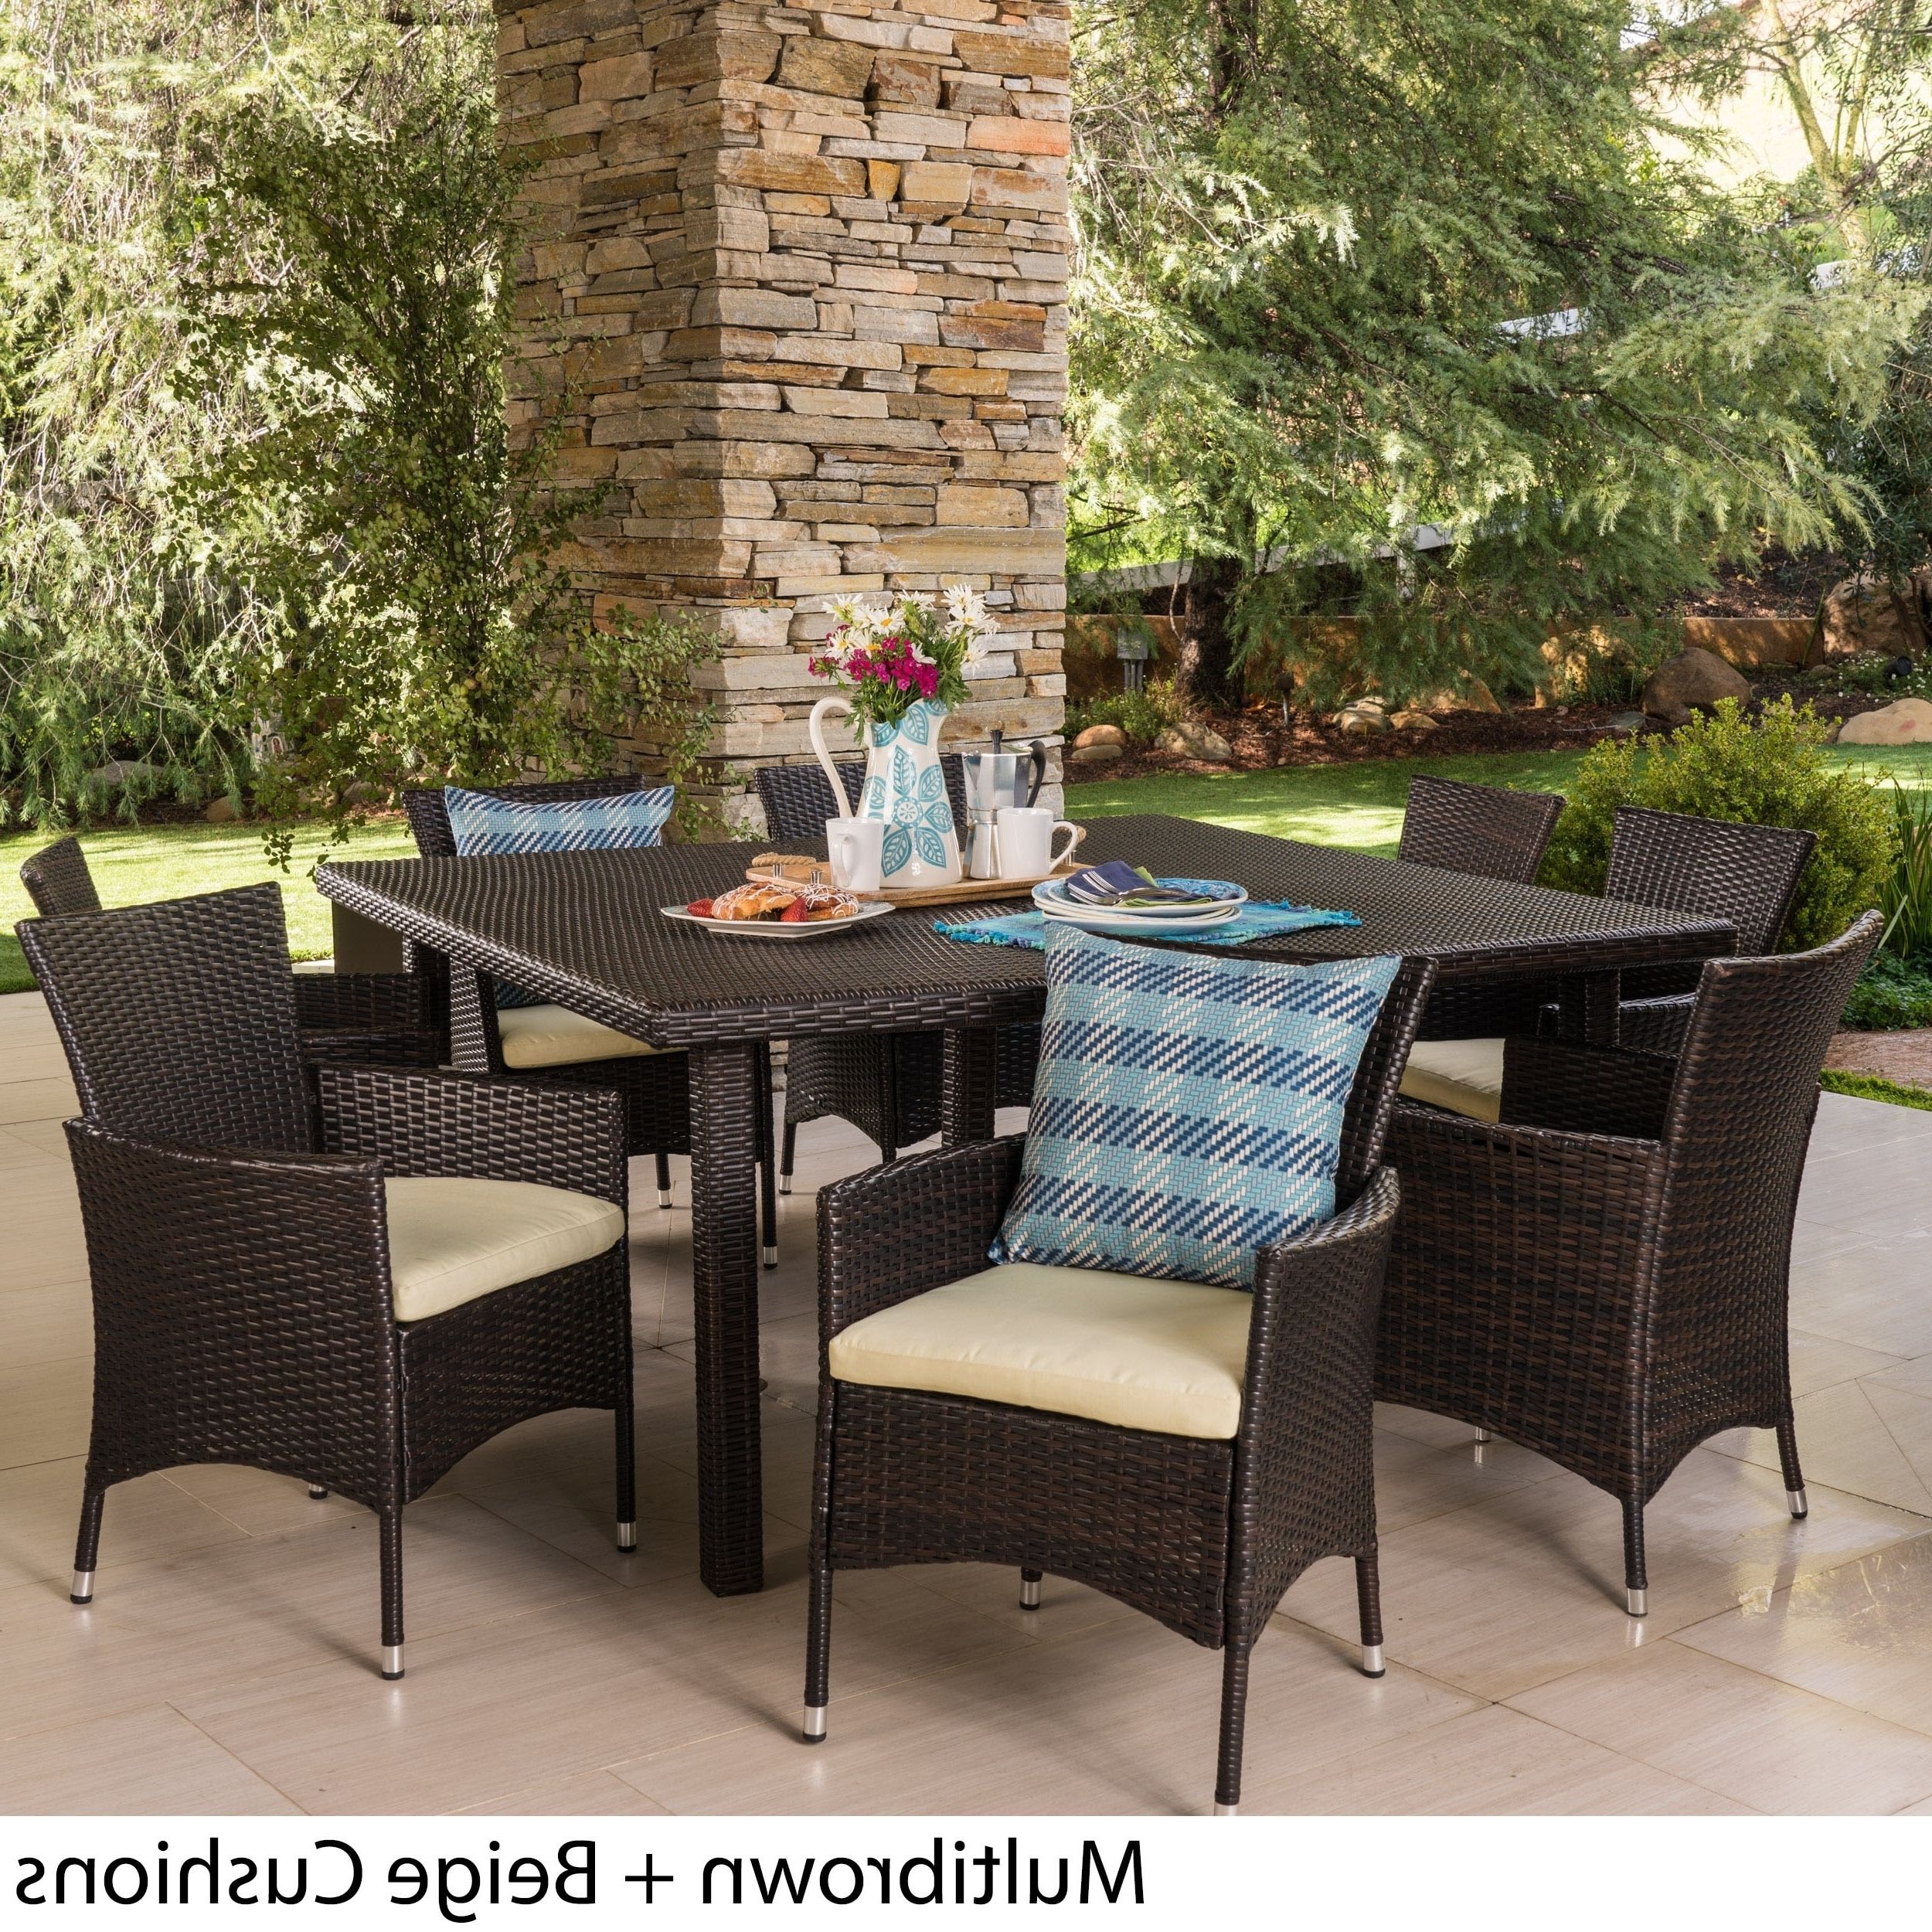 Recent 9 Piece Patio Dining Sets In Christopher Knight Home Aristo Outdoor 9 Piece Square Wicker Dining Set (View 1 of 15)